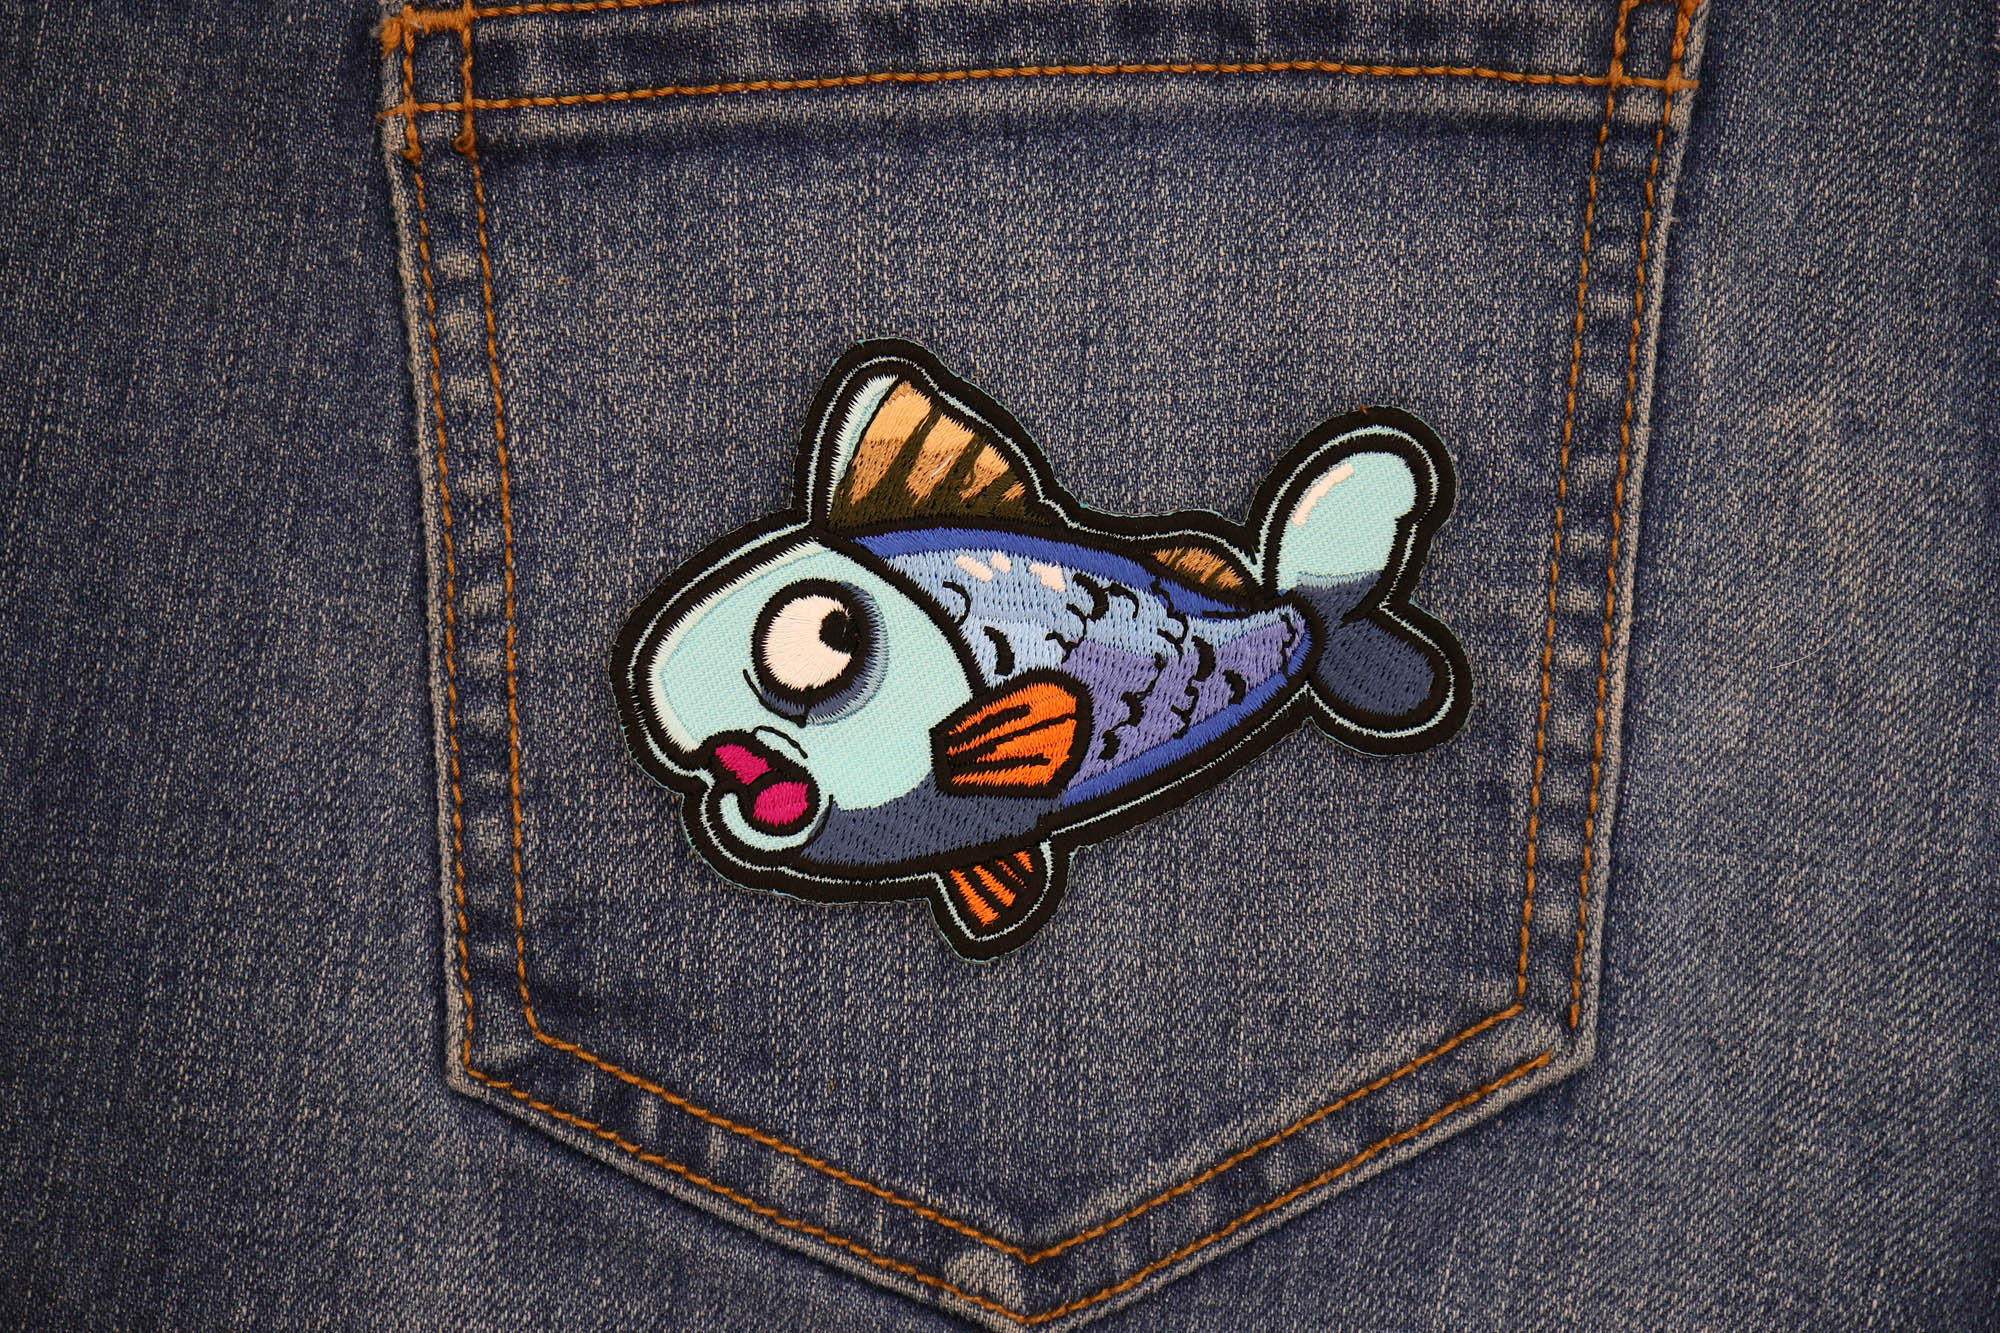 Live to Fish Patch for Sewing or Ironing on to Jackets by Ivamis Patches